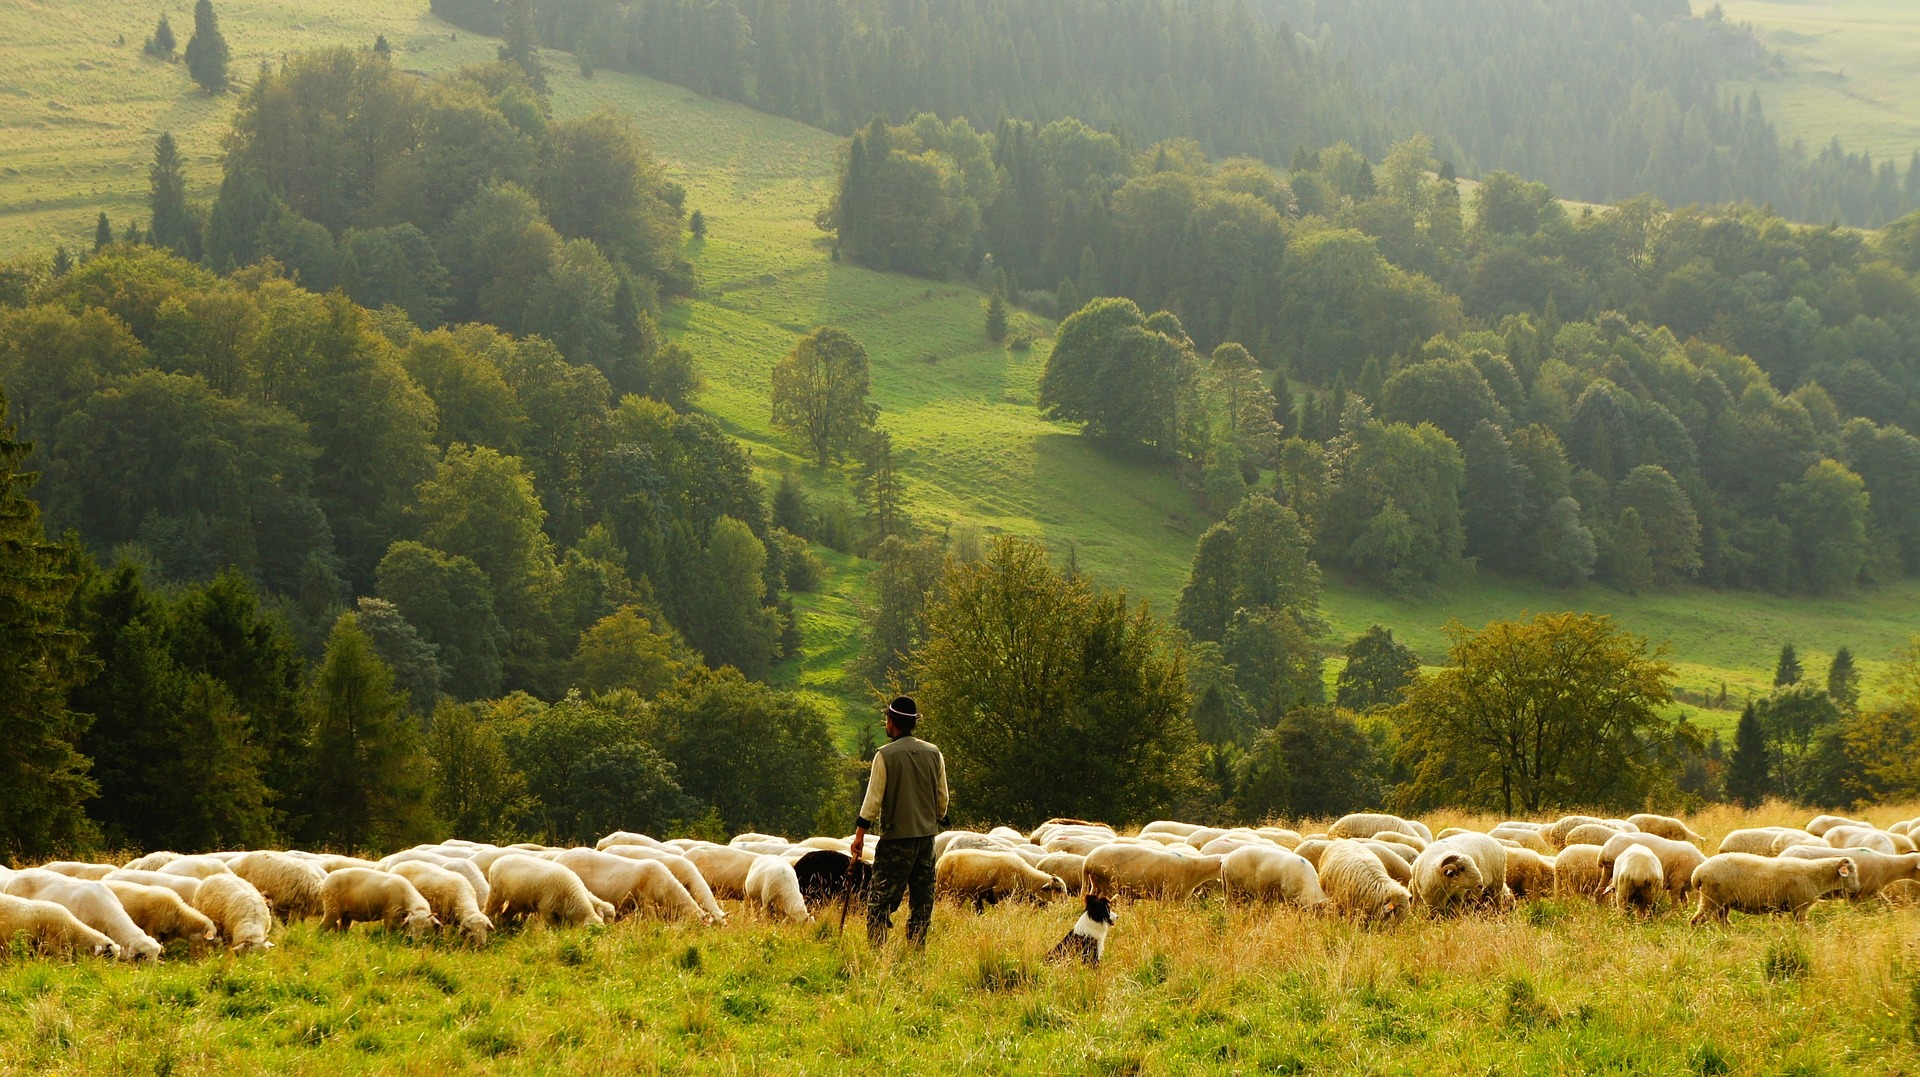 On being a shepherd of God's people